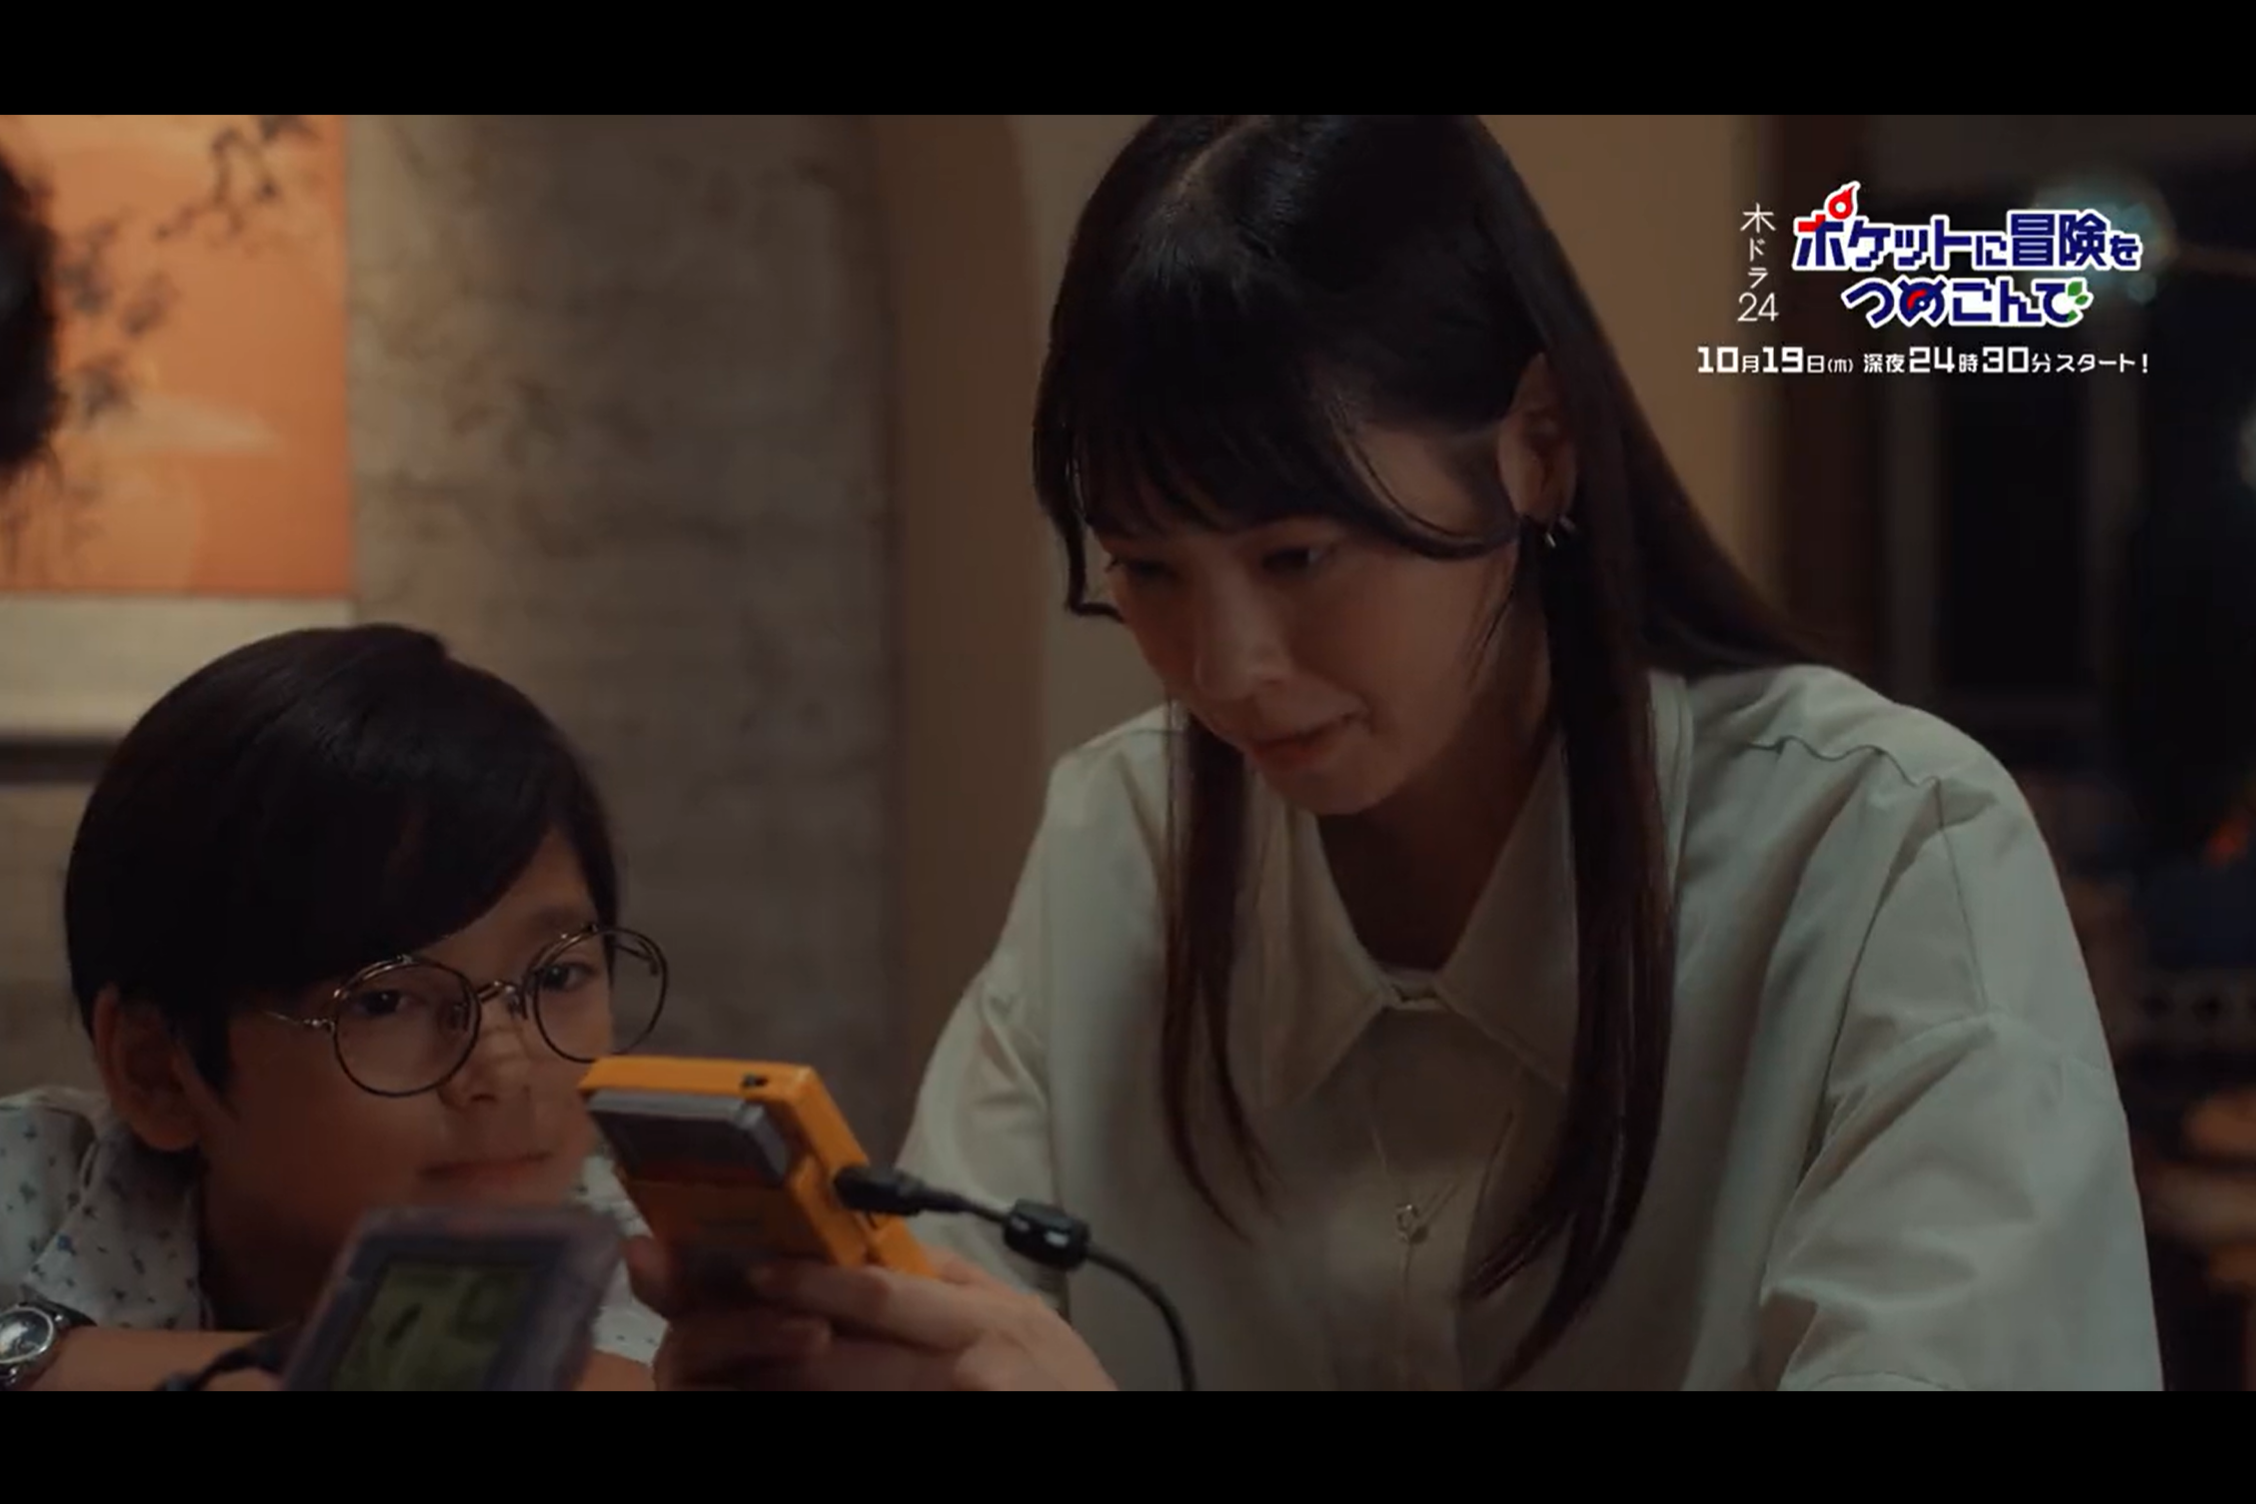 An adult woman and a child playing Game Boys together